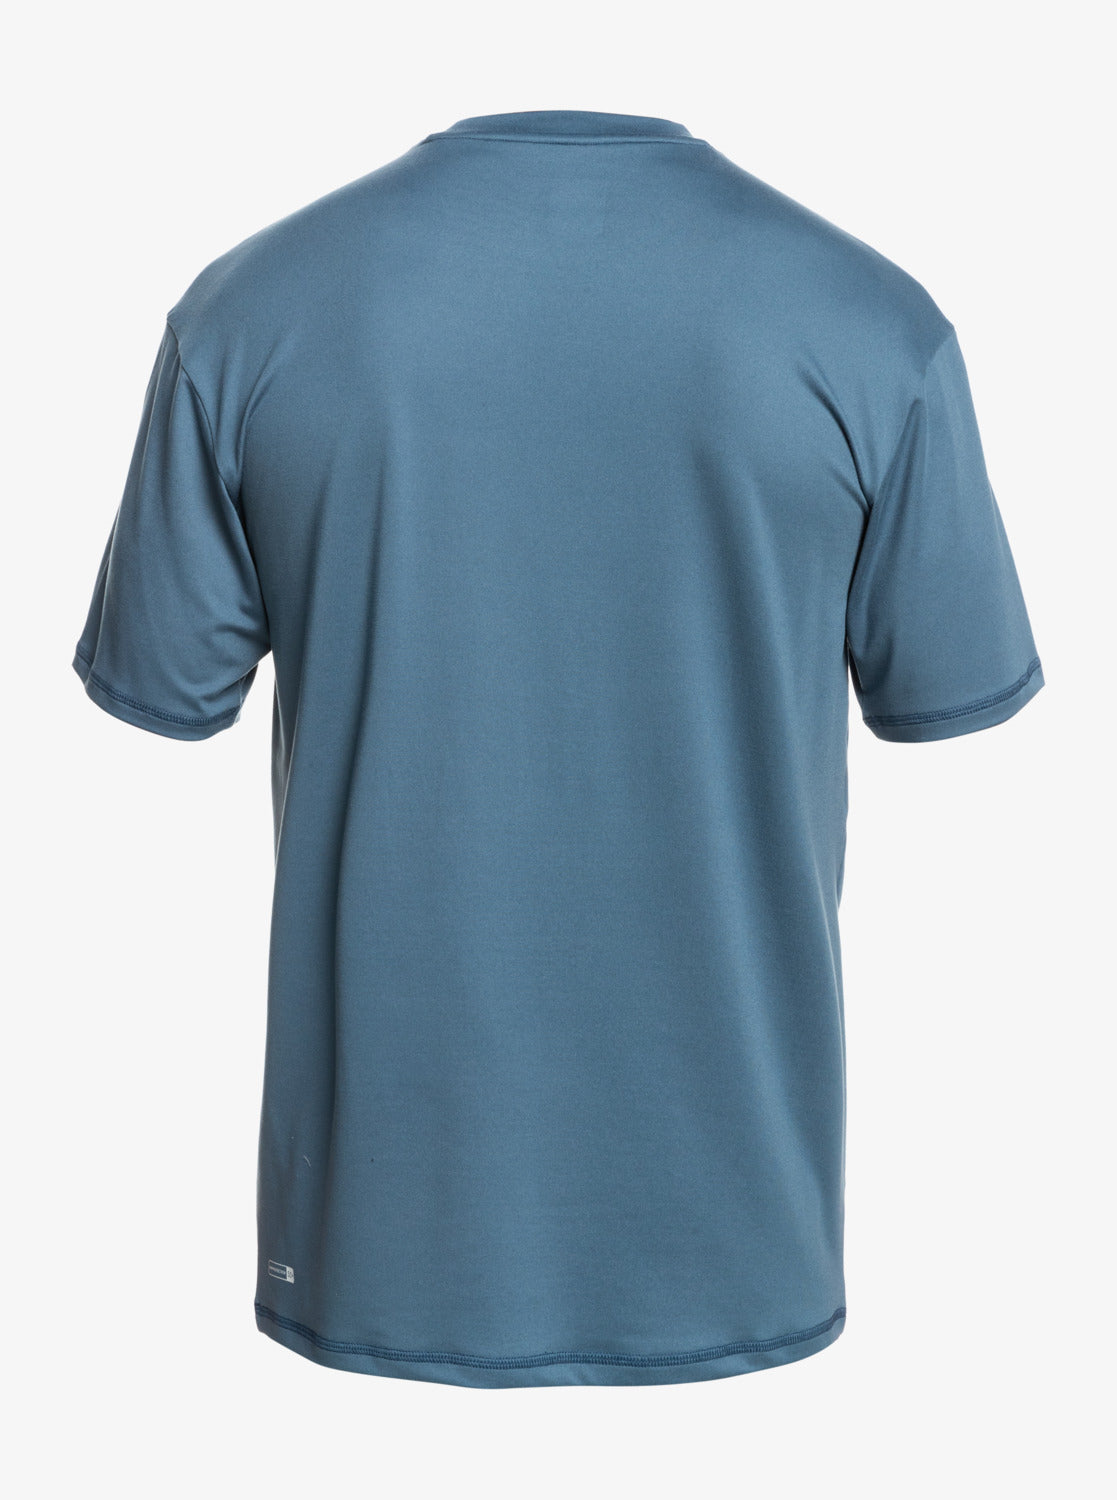 Quiksilver: Omni Session UPF Short Sleeve Surf Tee